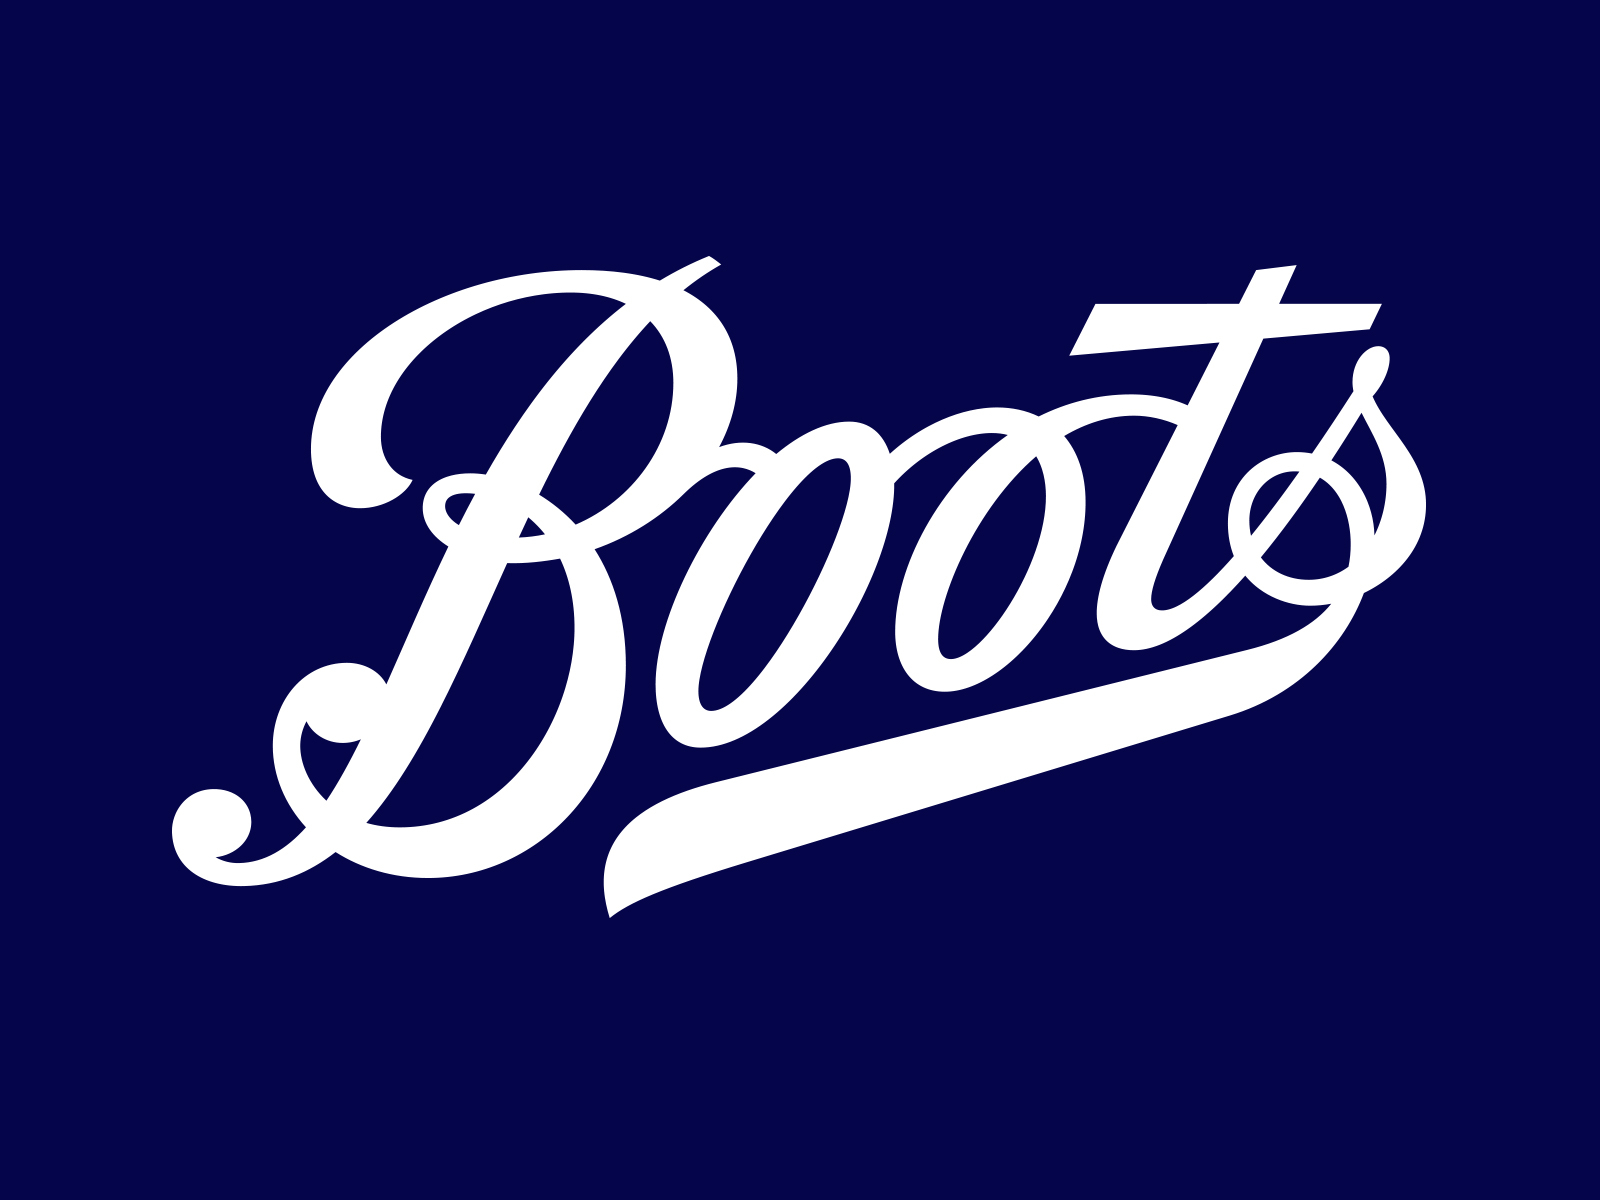 Boots Logo by Rob Clarke on Dribbble